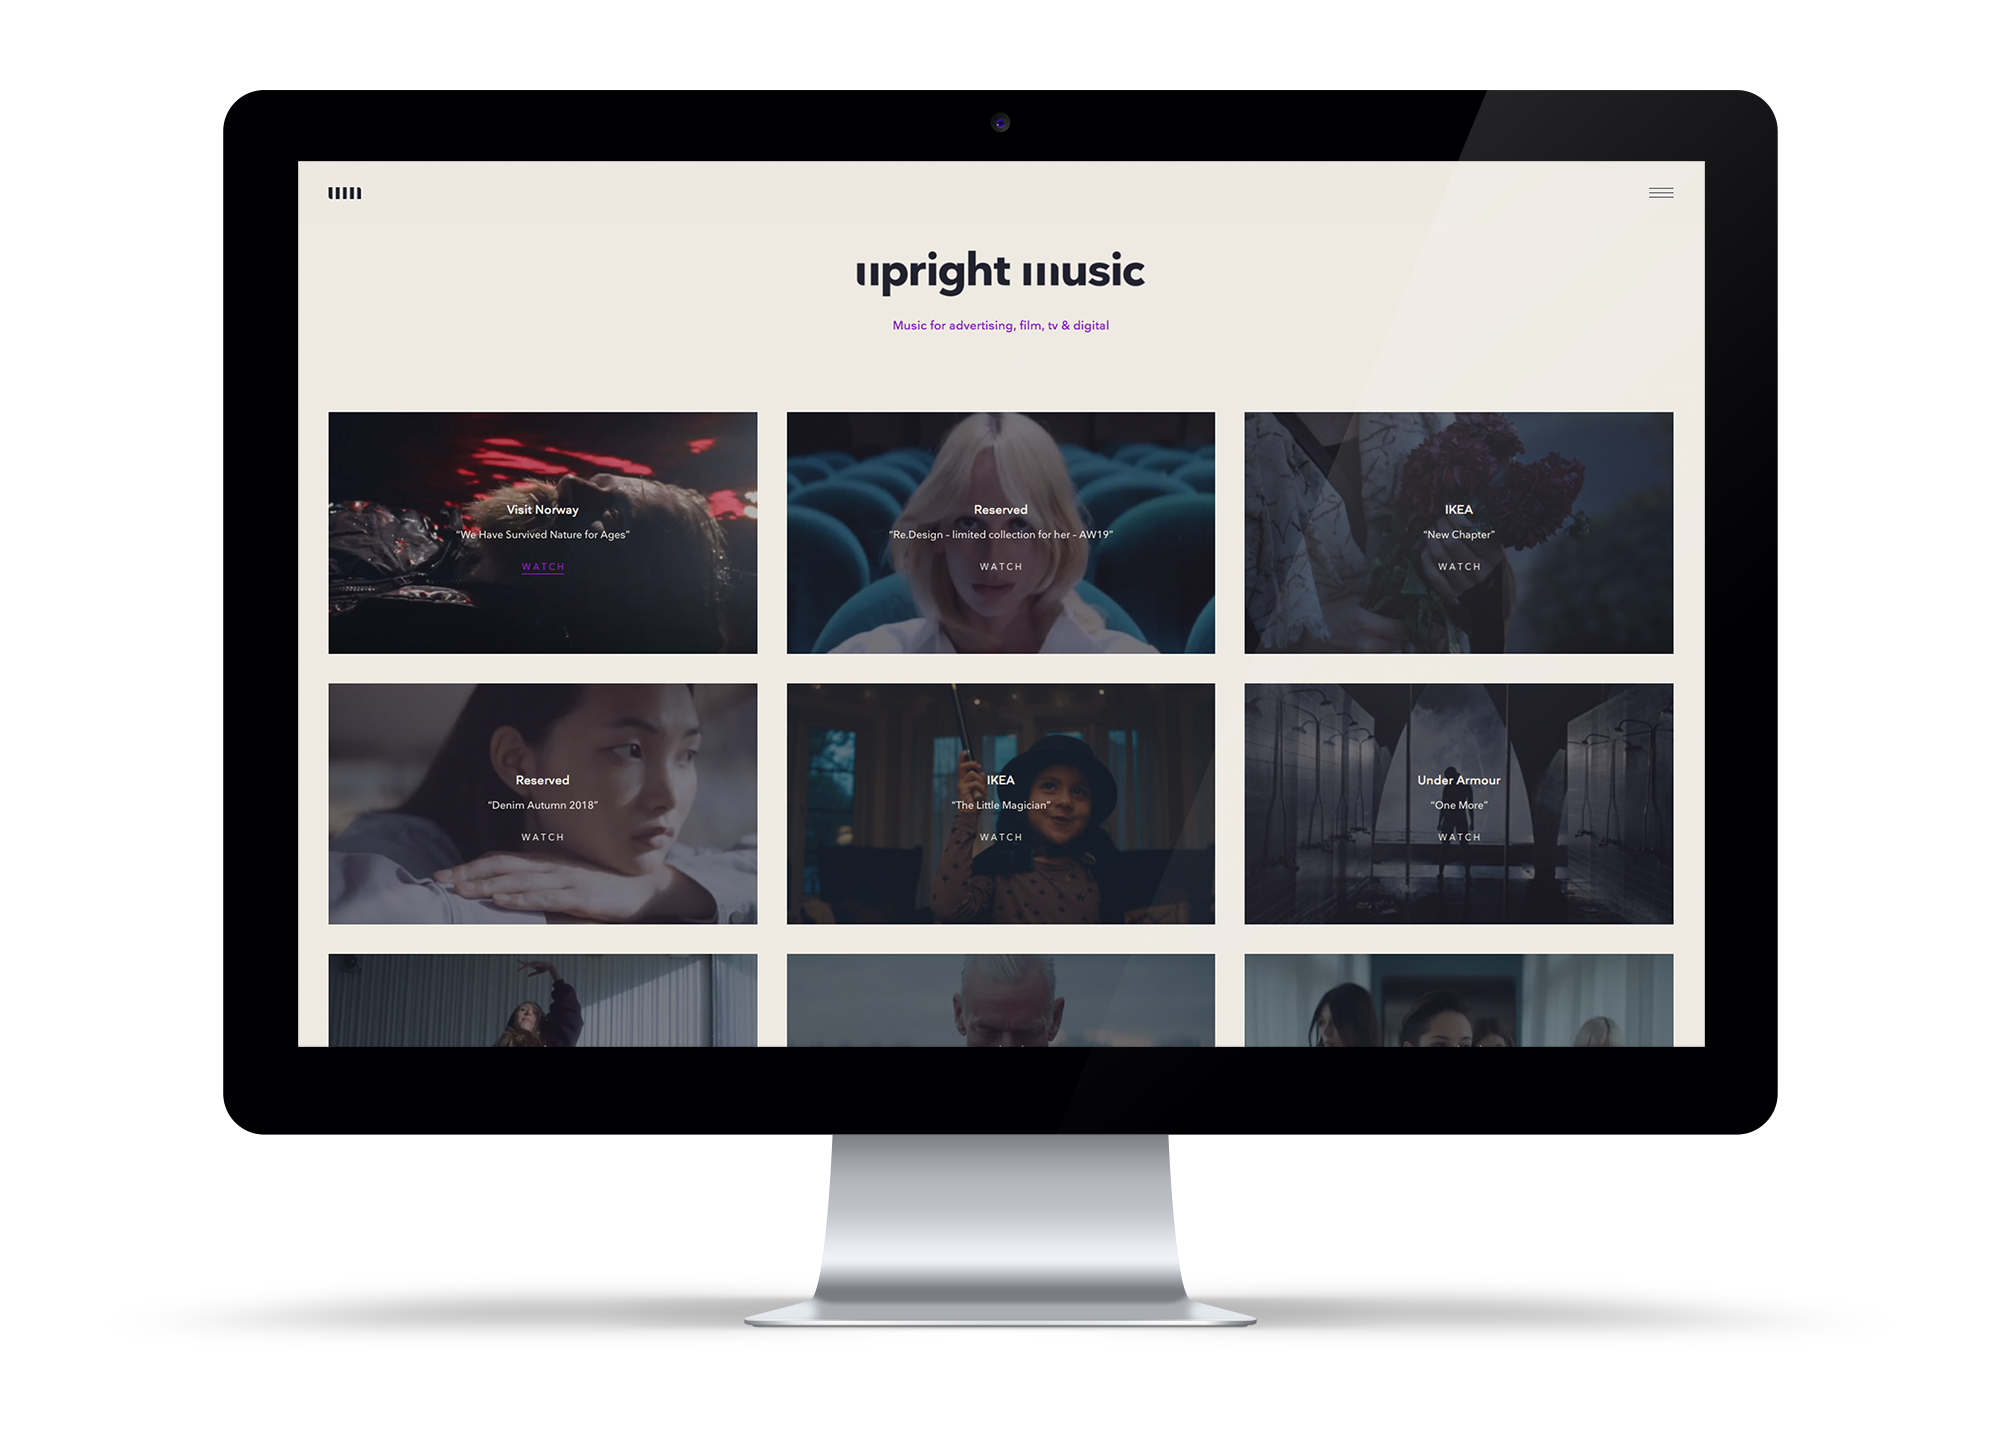 upright-music_redesignby-danish-etypes_squarespace-commerce-webdesign_(creative-direction_christelvoss.com).png